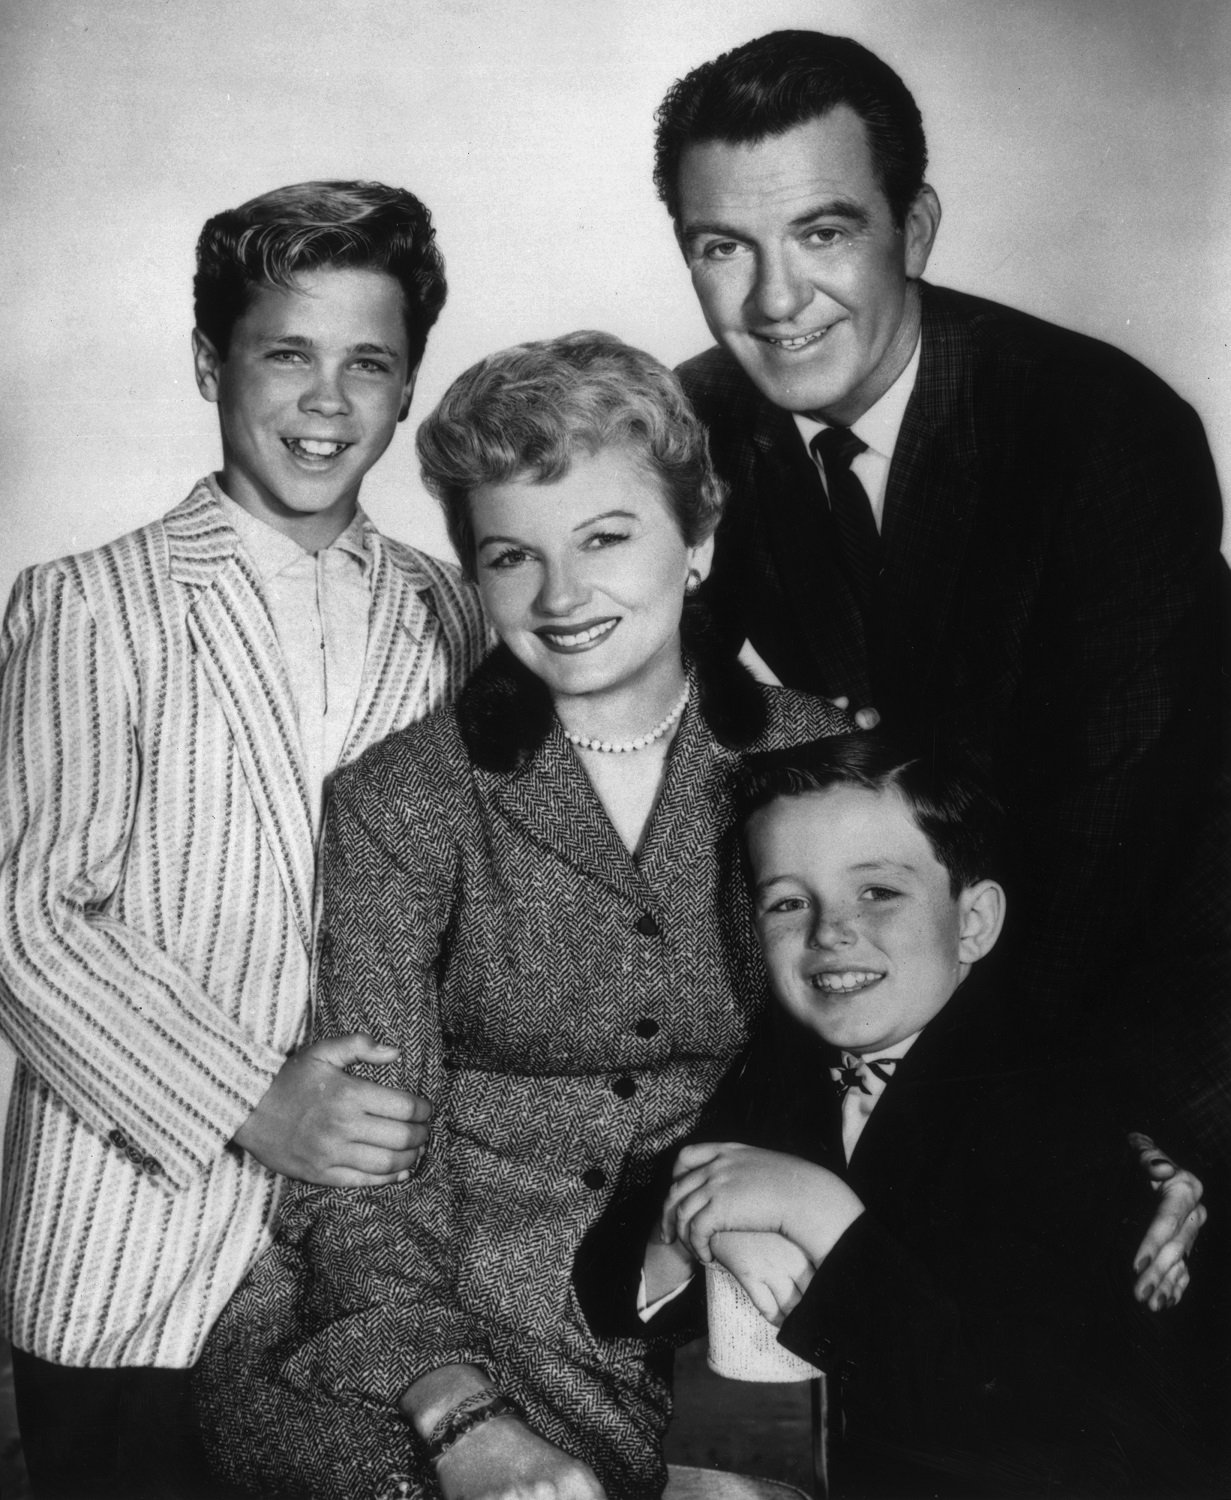 Tony Dow, Hugh Beaumont, Jerry Mathers, and Barbara Billingsley appear in a promotional photo for 'Leave It to Beaver'